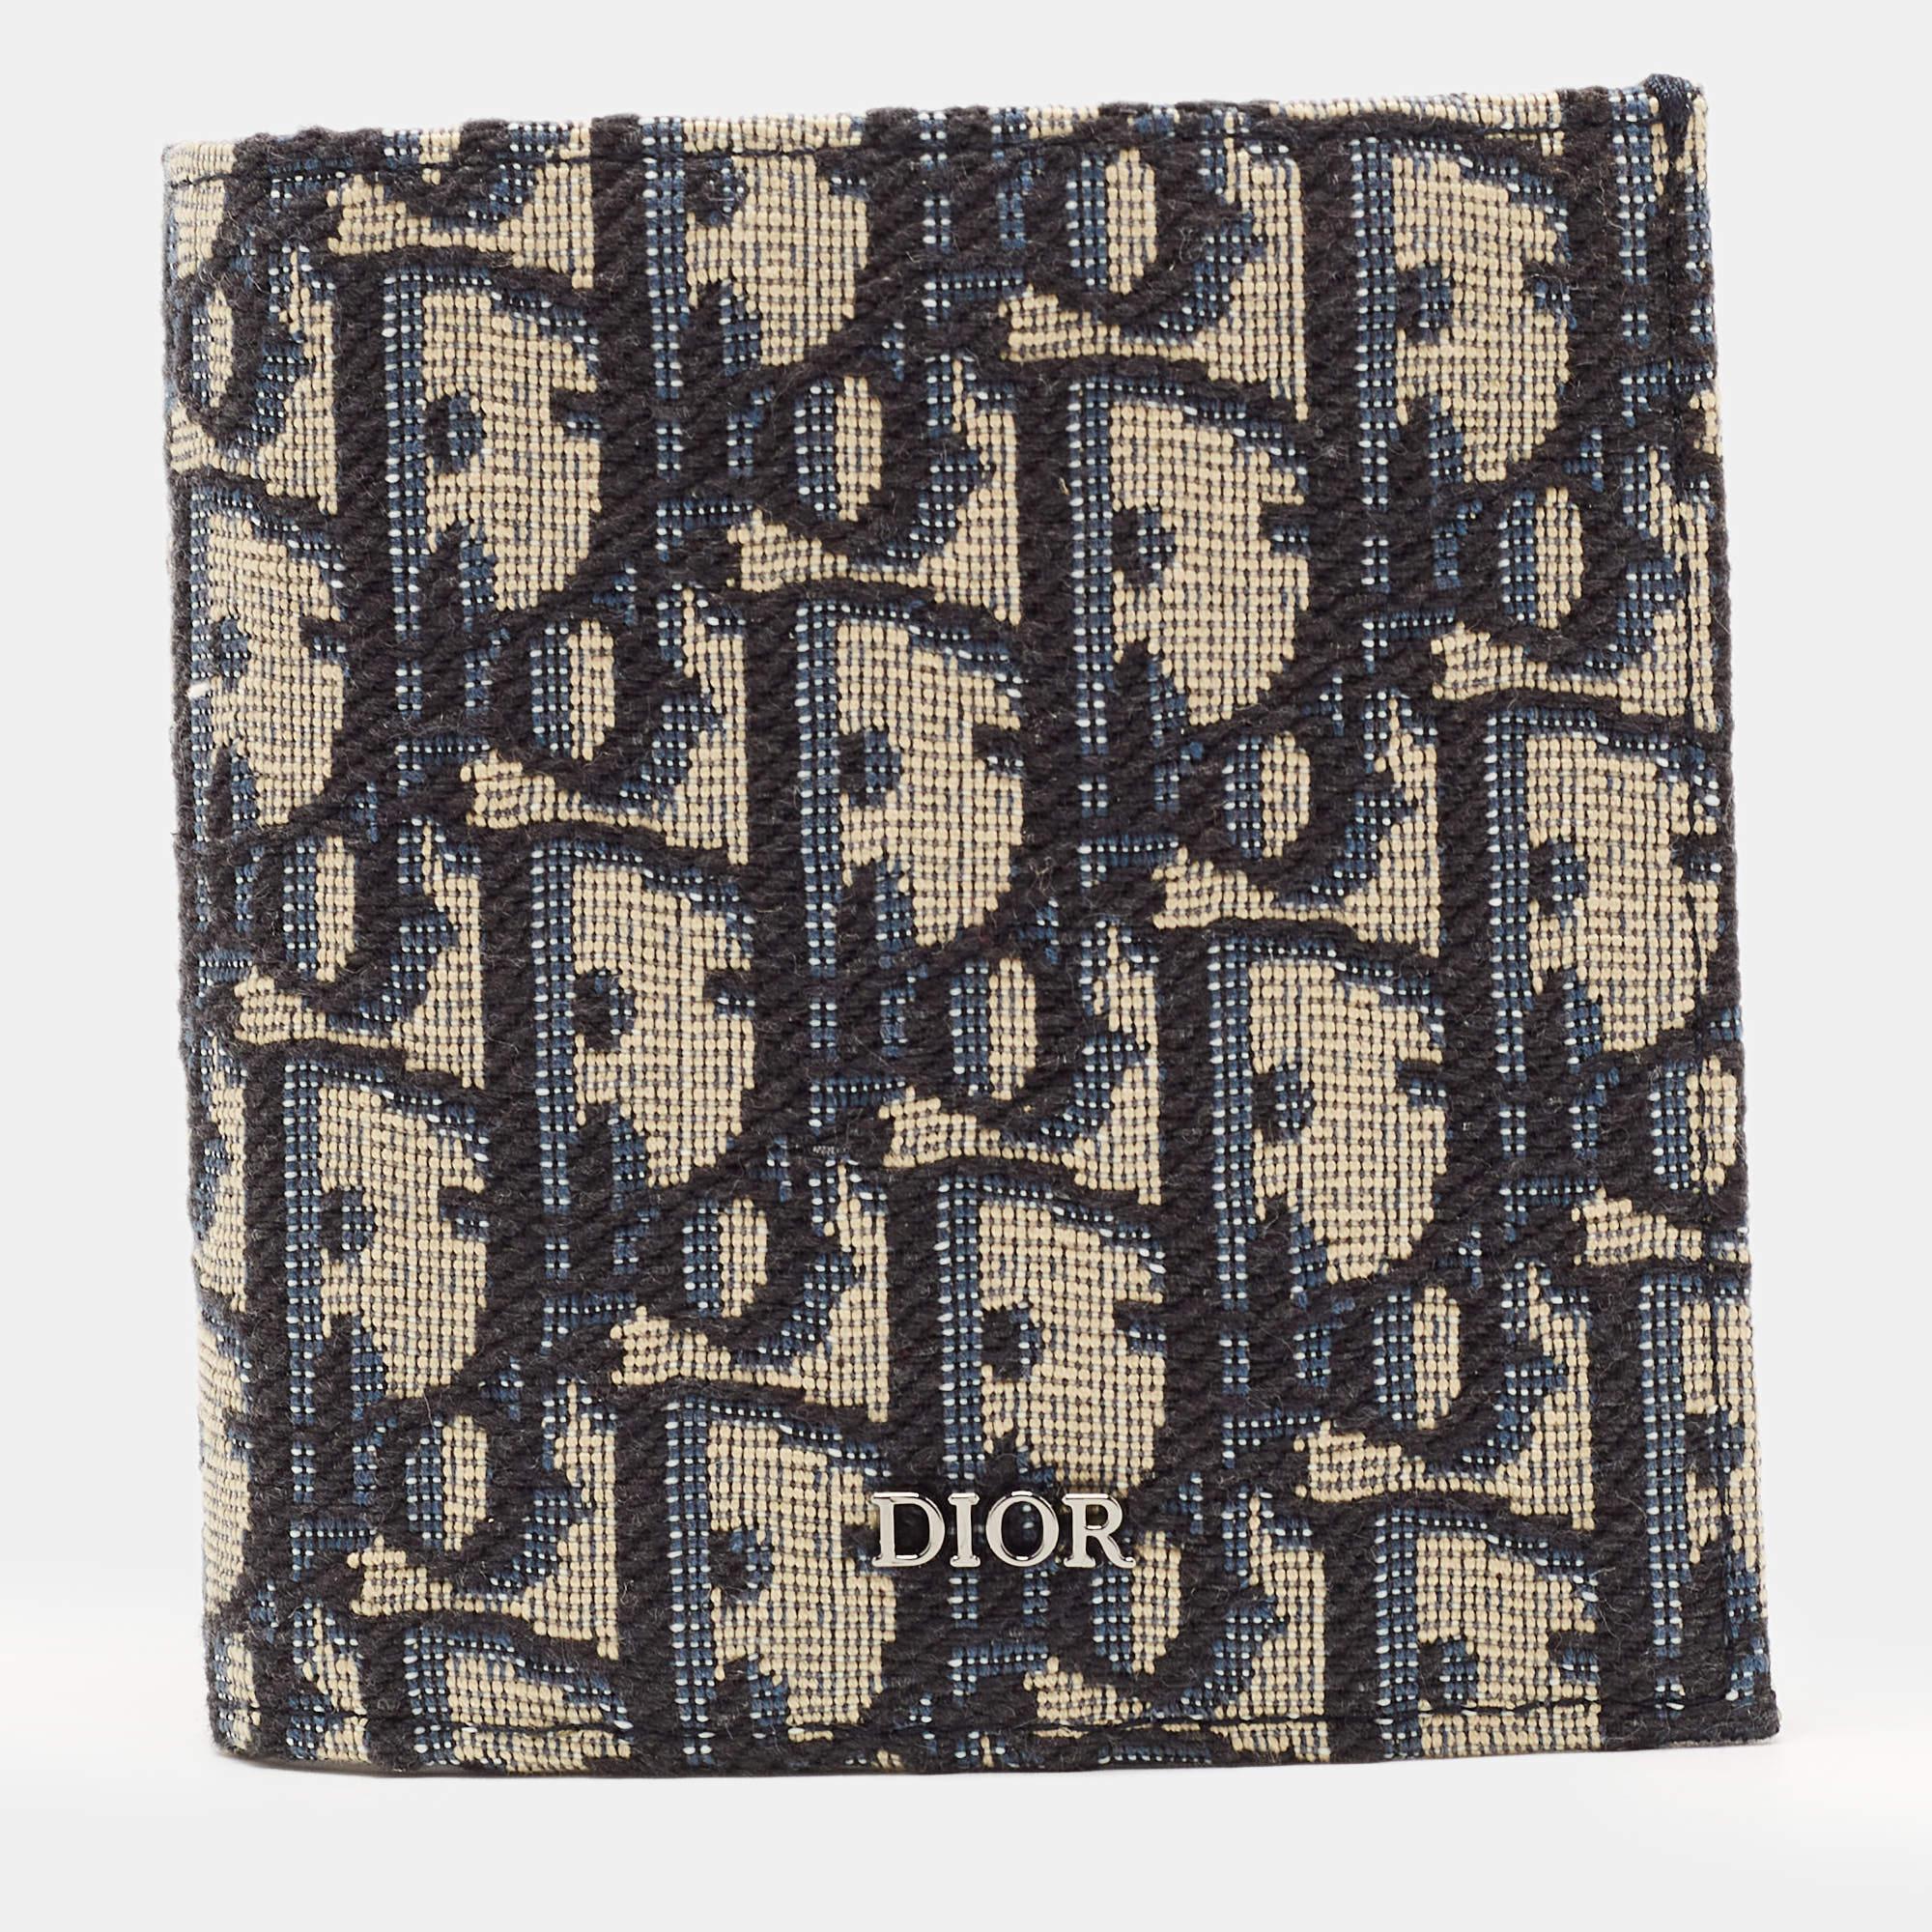 This Dior wallet is a great everyday accessory. It is made from quality materials on the exterior and features a compartmentalized interior.

